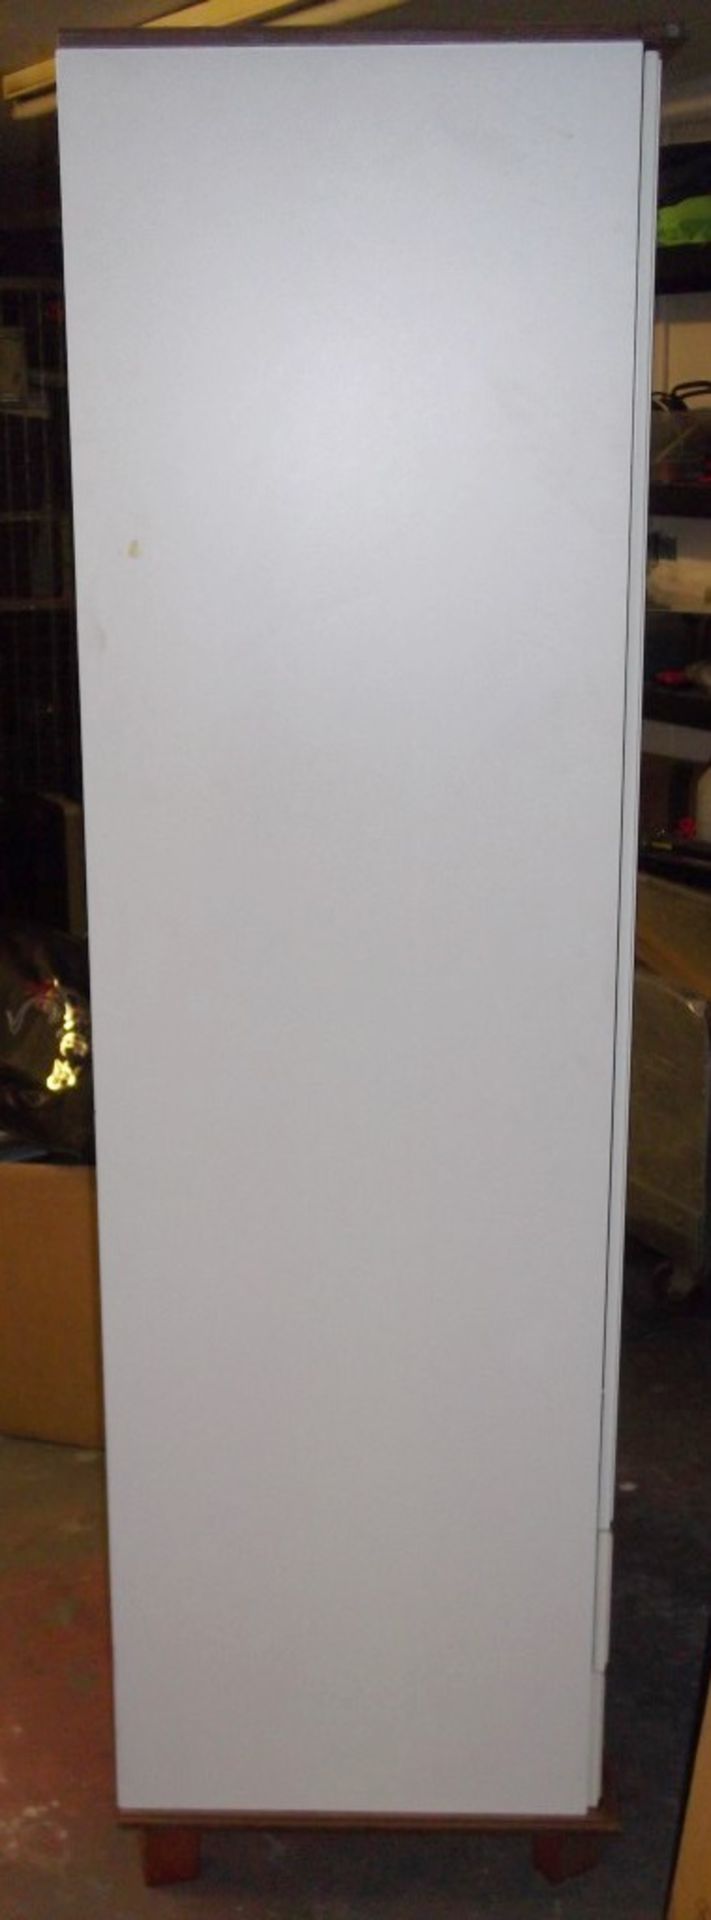 1 x Large Cream Wardrobe - 2 Door,/ 2 Drawer - Pre-Built - Pre-owned, In Good Condition - H181 x W81 - Image 6 of 7